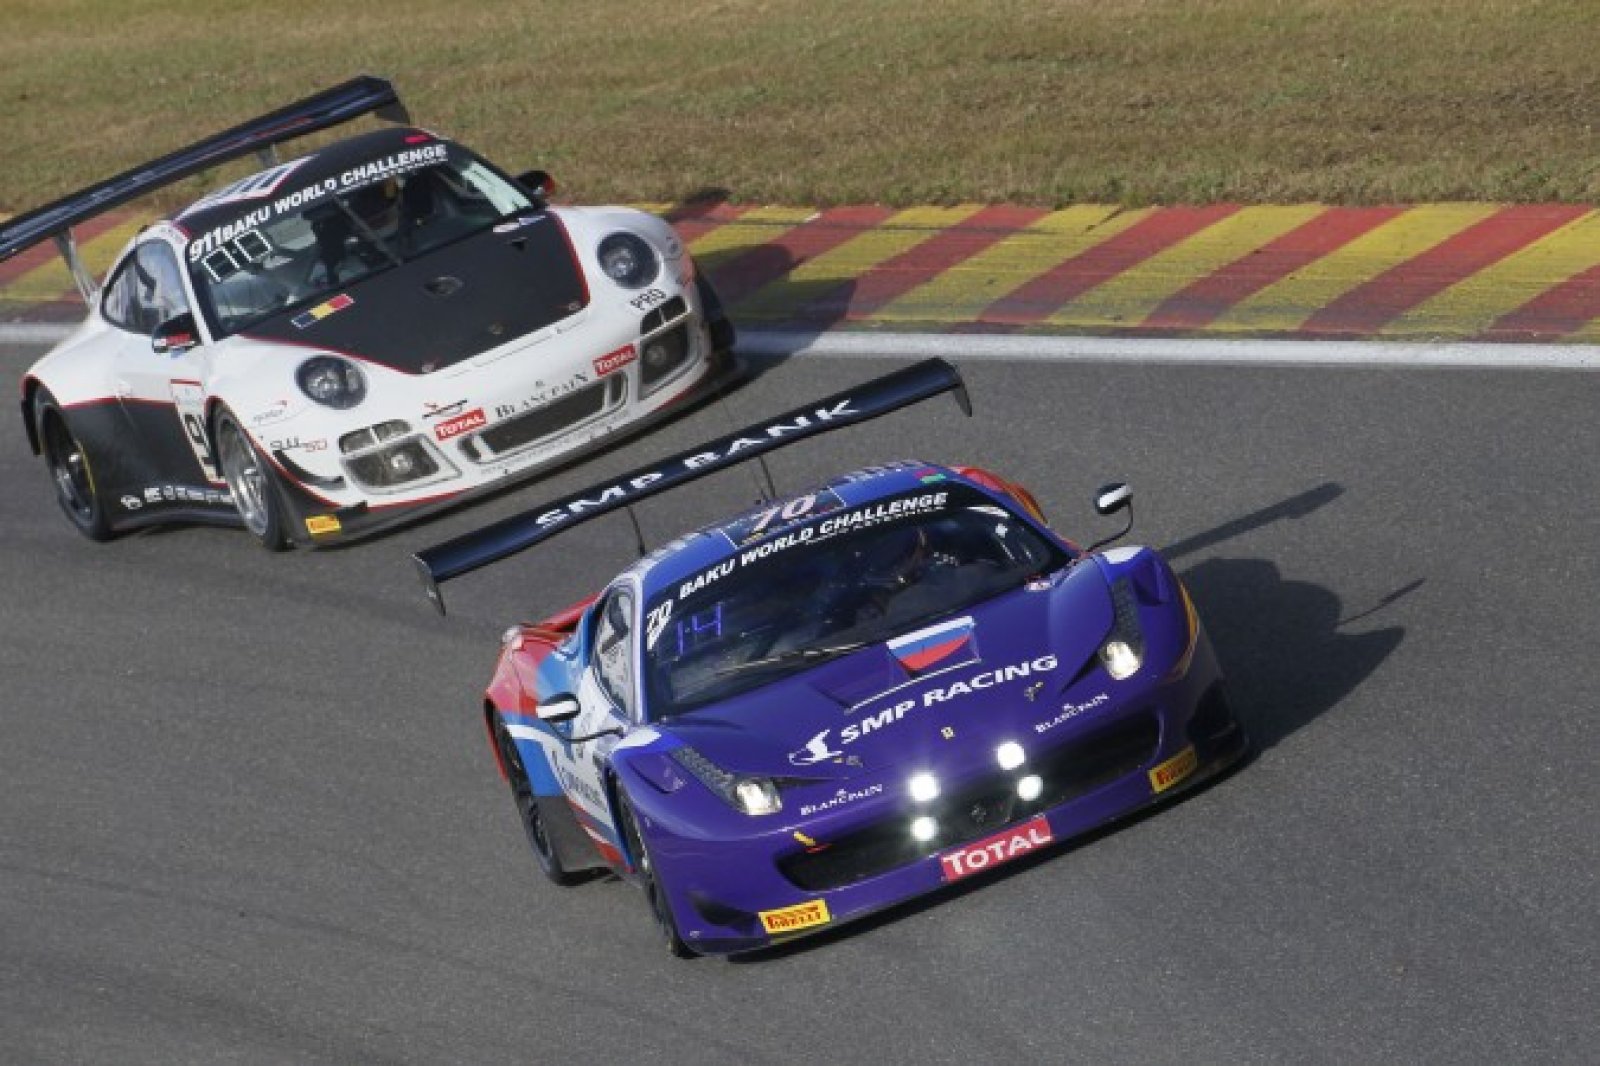 SMP Racing Ferrari takes provisional pole for 65th Total 24 Hours of Spa